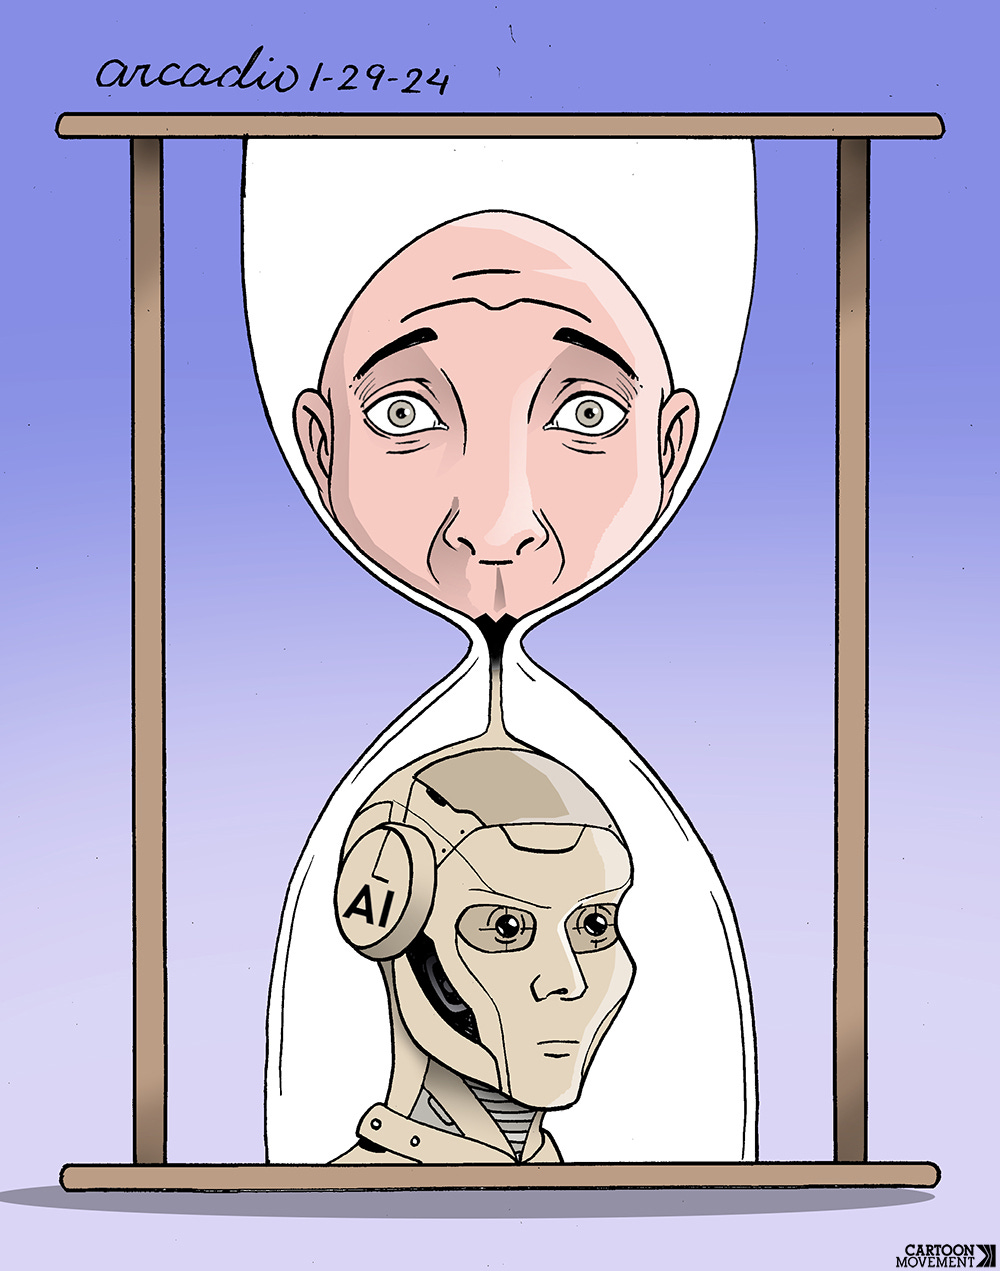 Cartoon showing an hourglass. The top of the hourglass is an anguished looking human face, which is slowly dissolving into the metal face of a robot in the lower half of the hourglass.